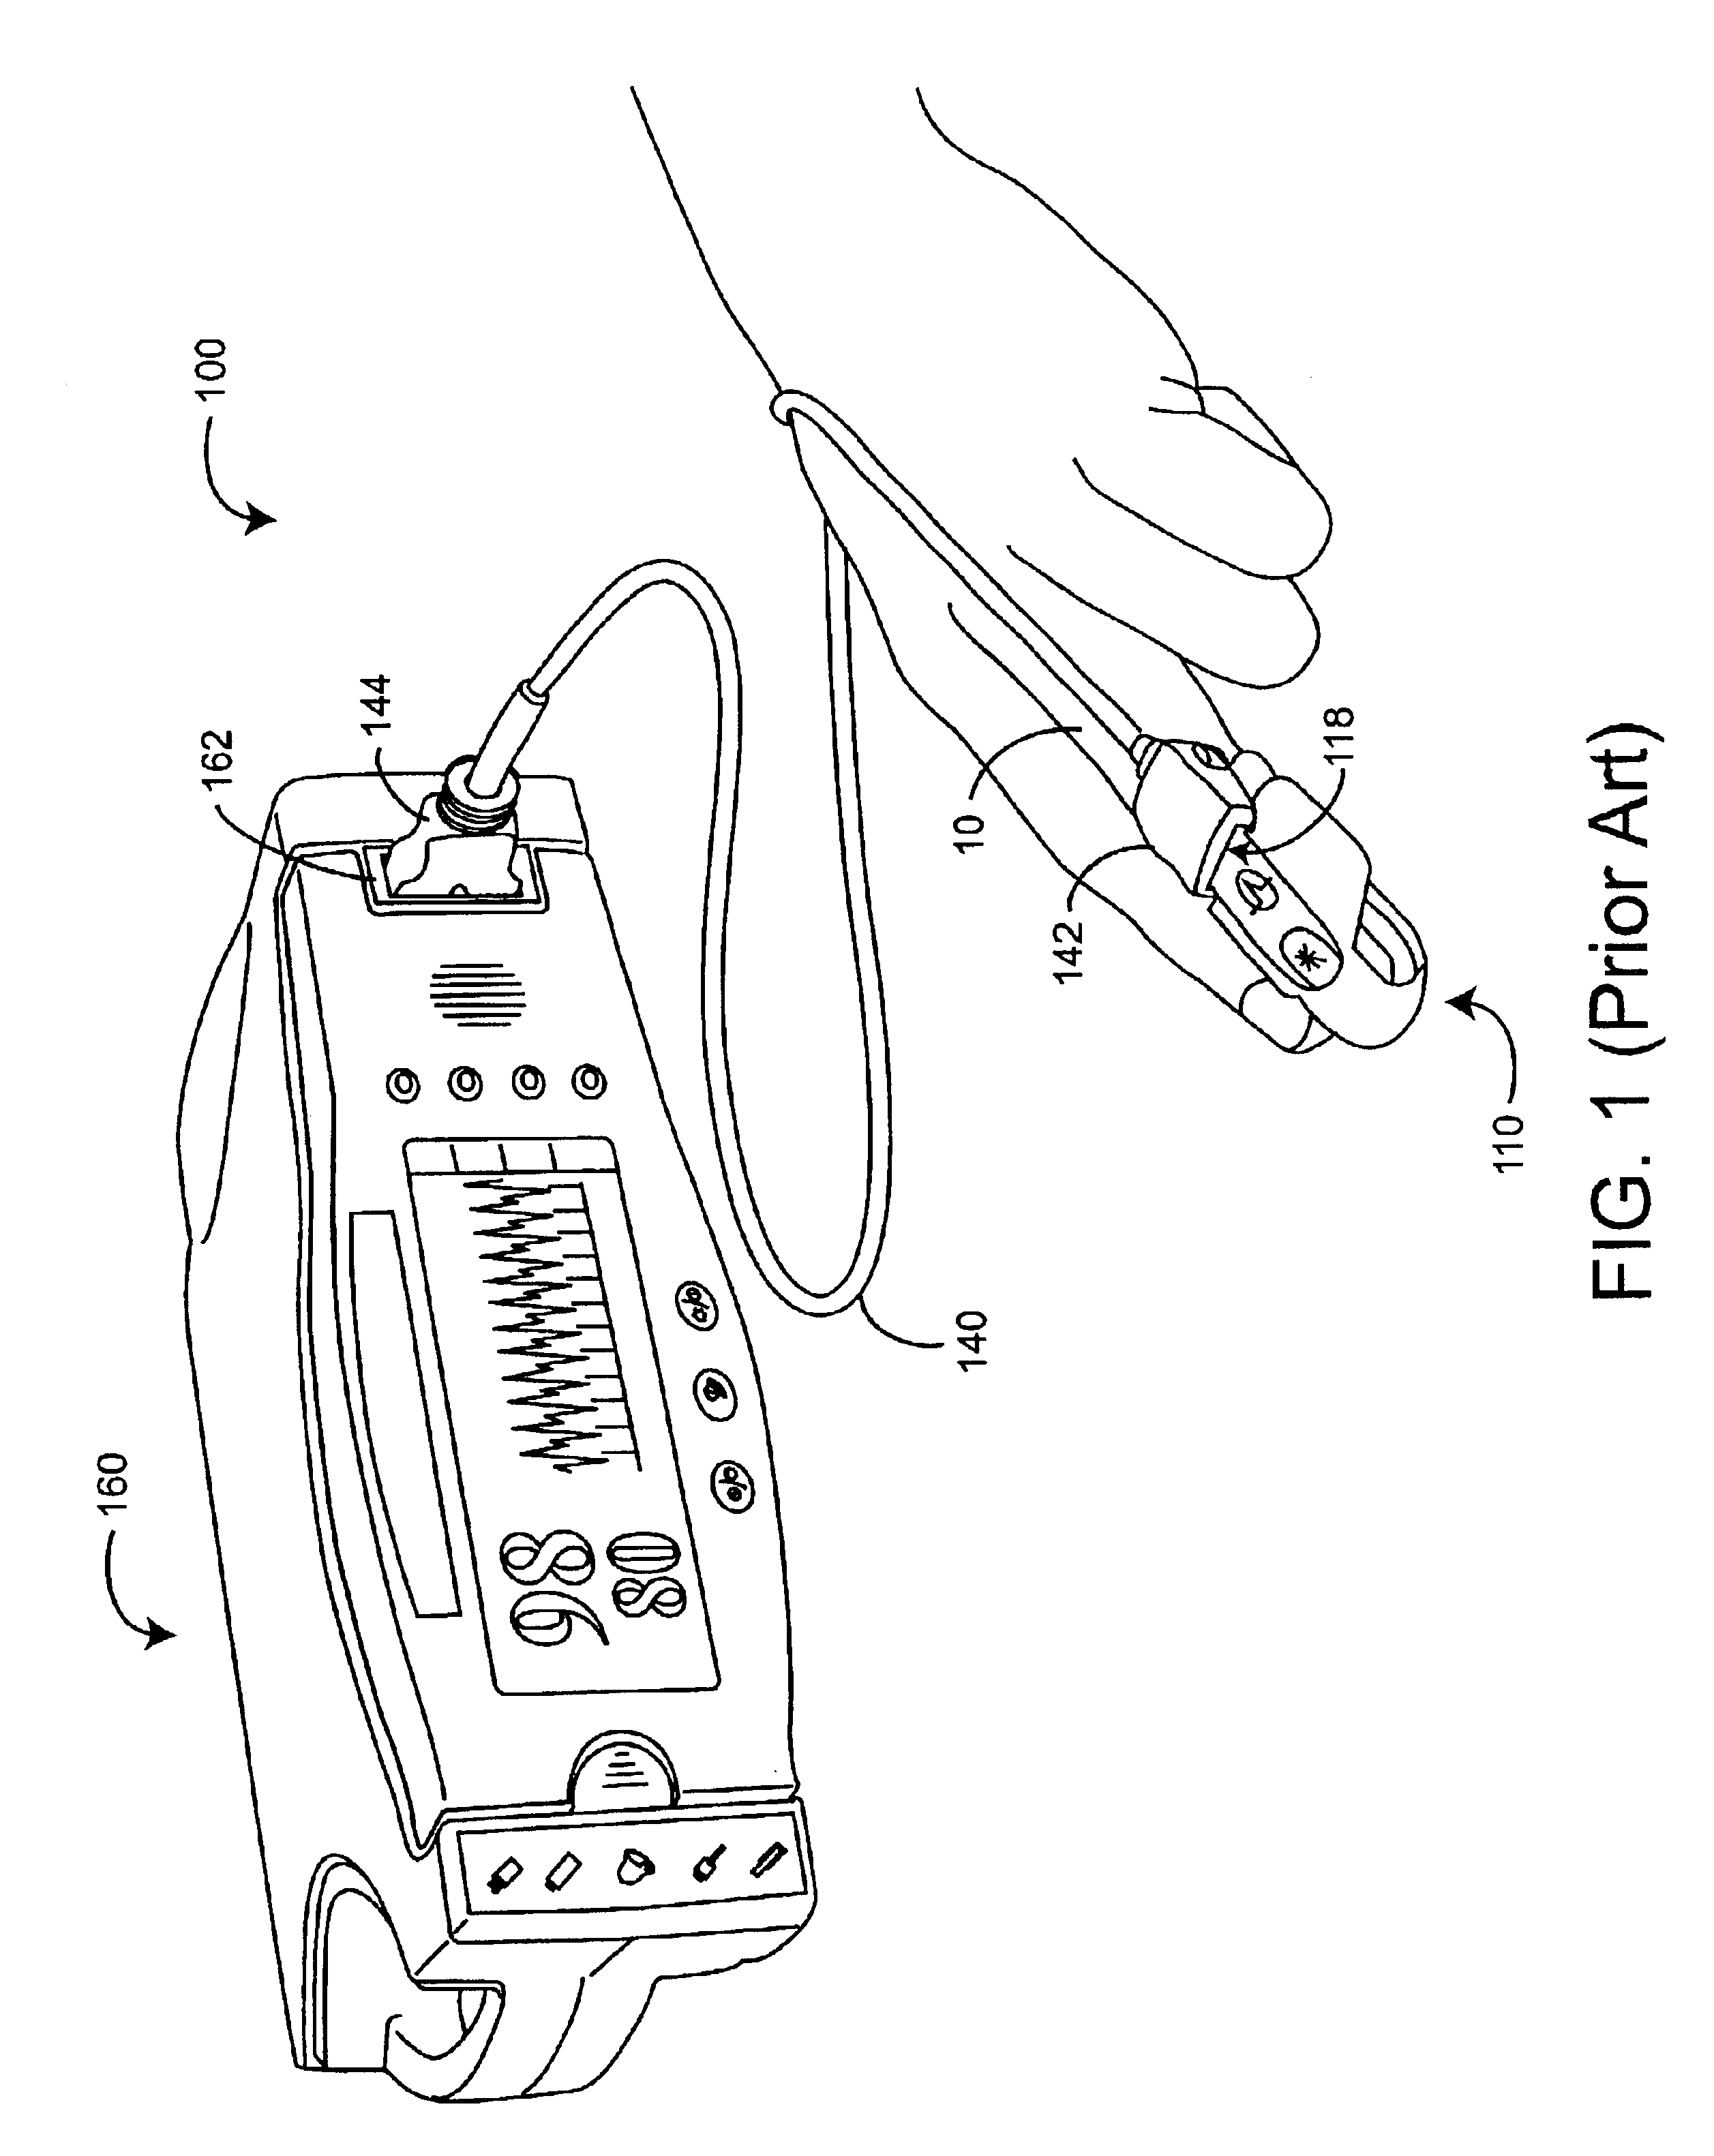 Physiological measurement communications adapter